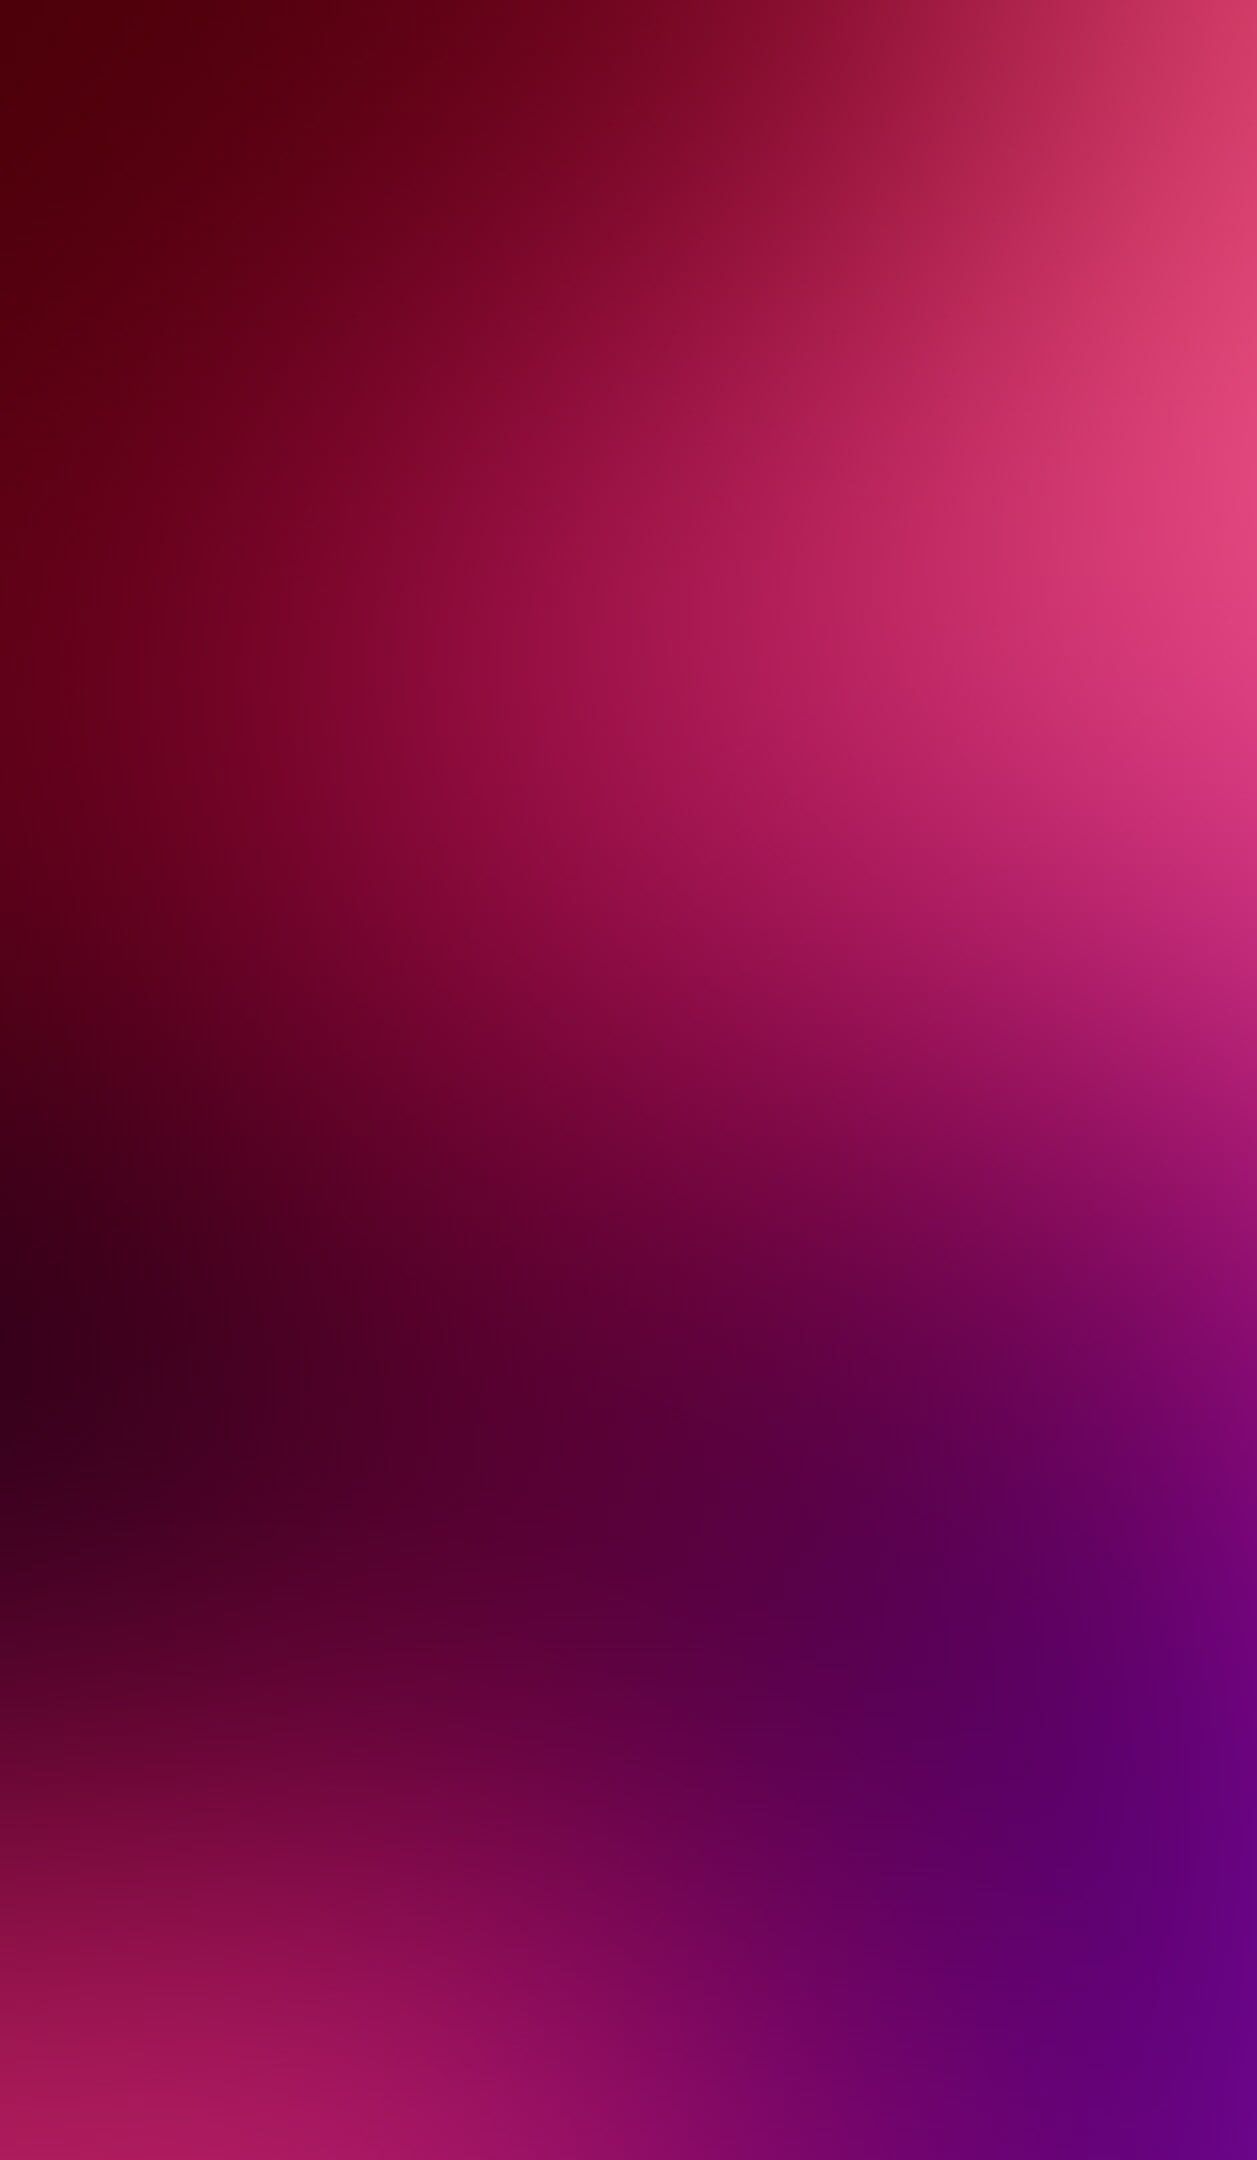 A red and purple gradient image - Magenta